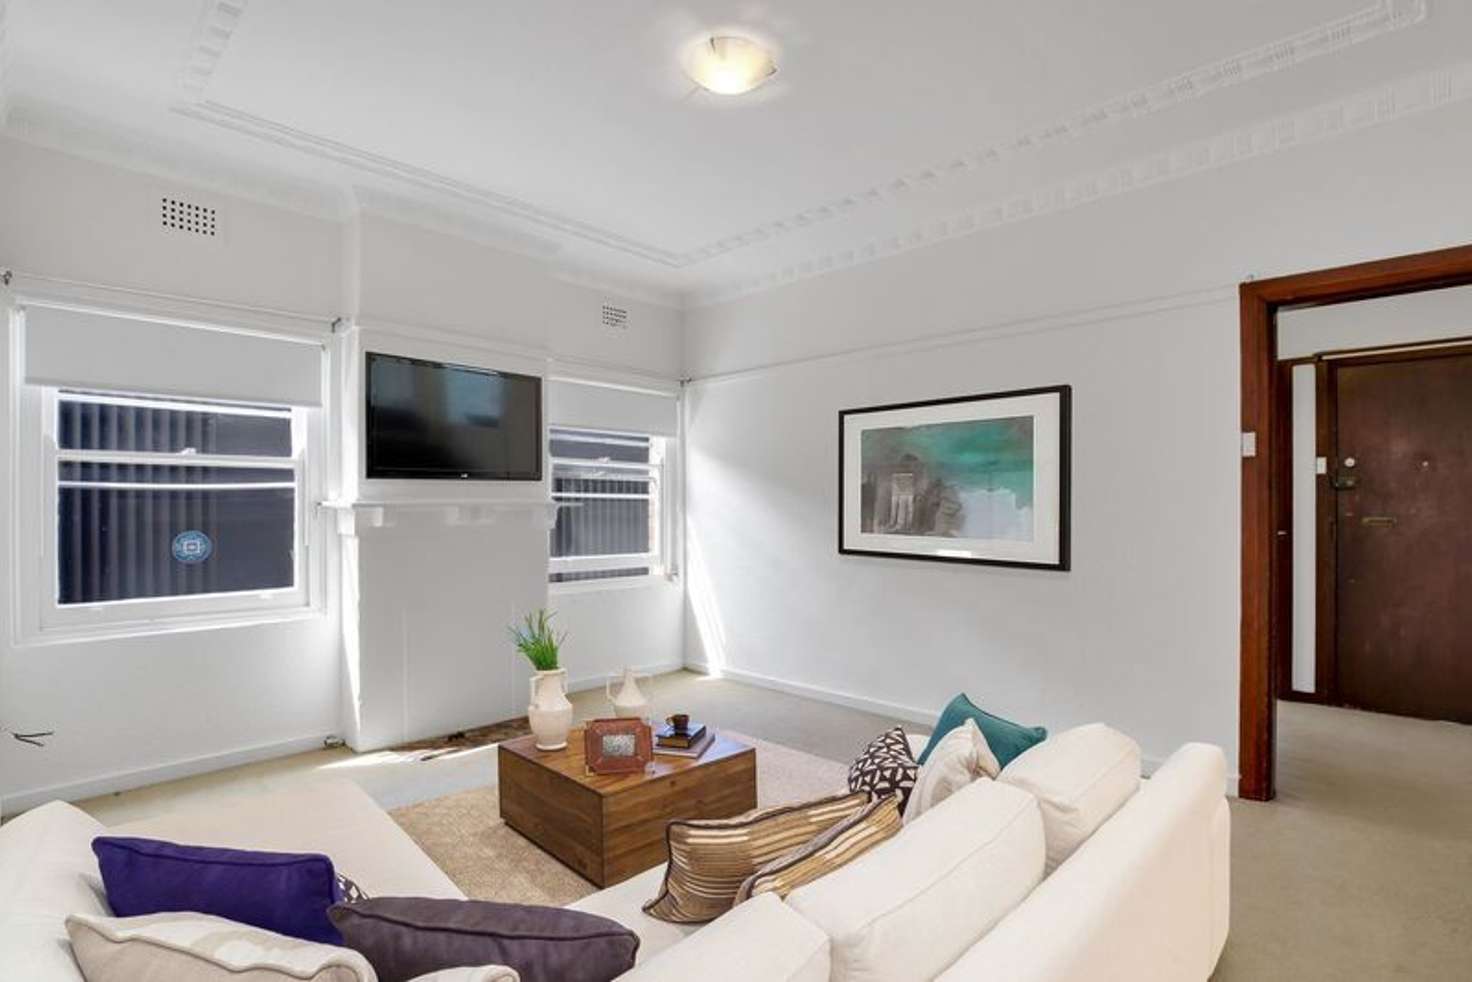 Main view of Homely apartment listing, 4/12 Park ave, Randwick NSW 2031